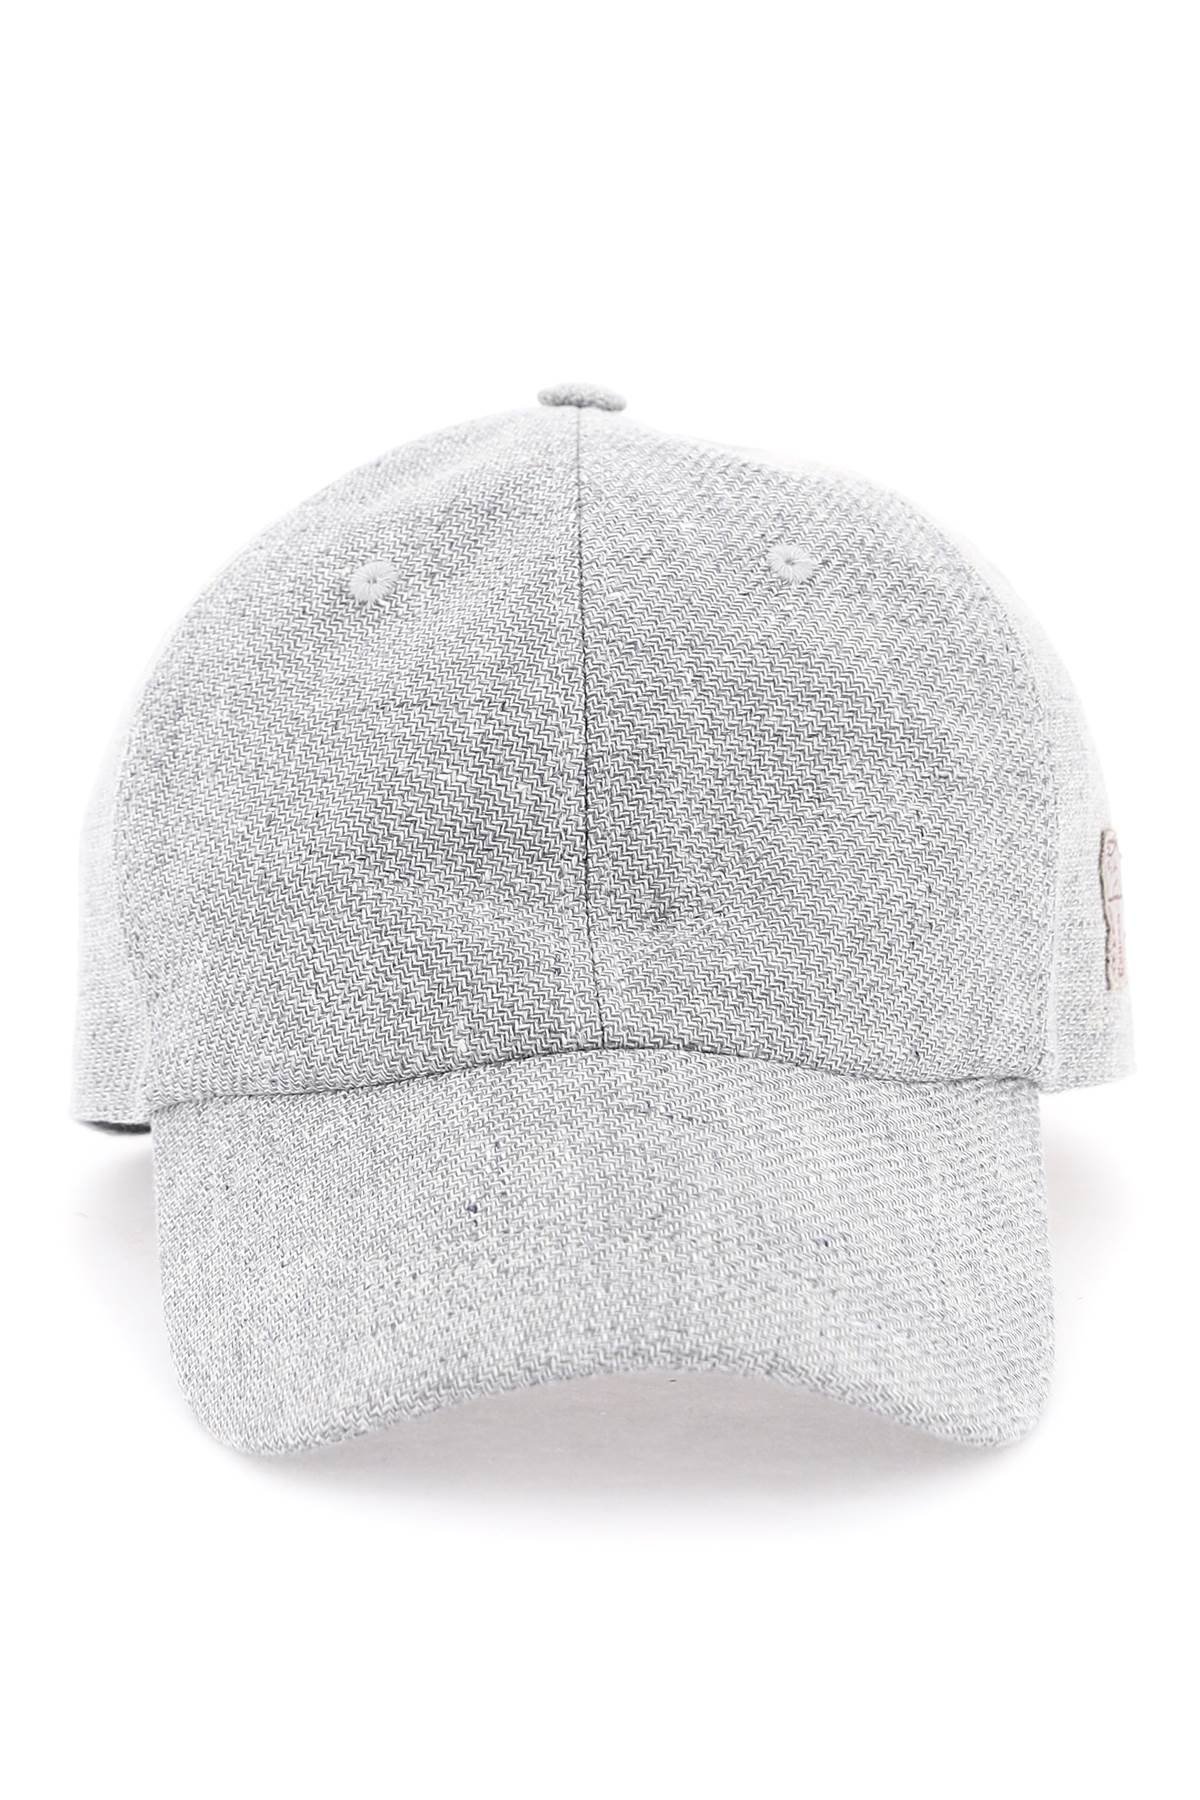 Brunello Cucinelli Replace With Double Quotediagonal Linen*** Wool And Silk Baseball Cap   Grey